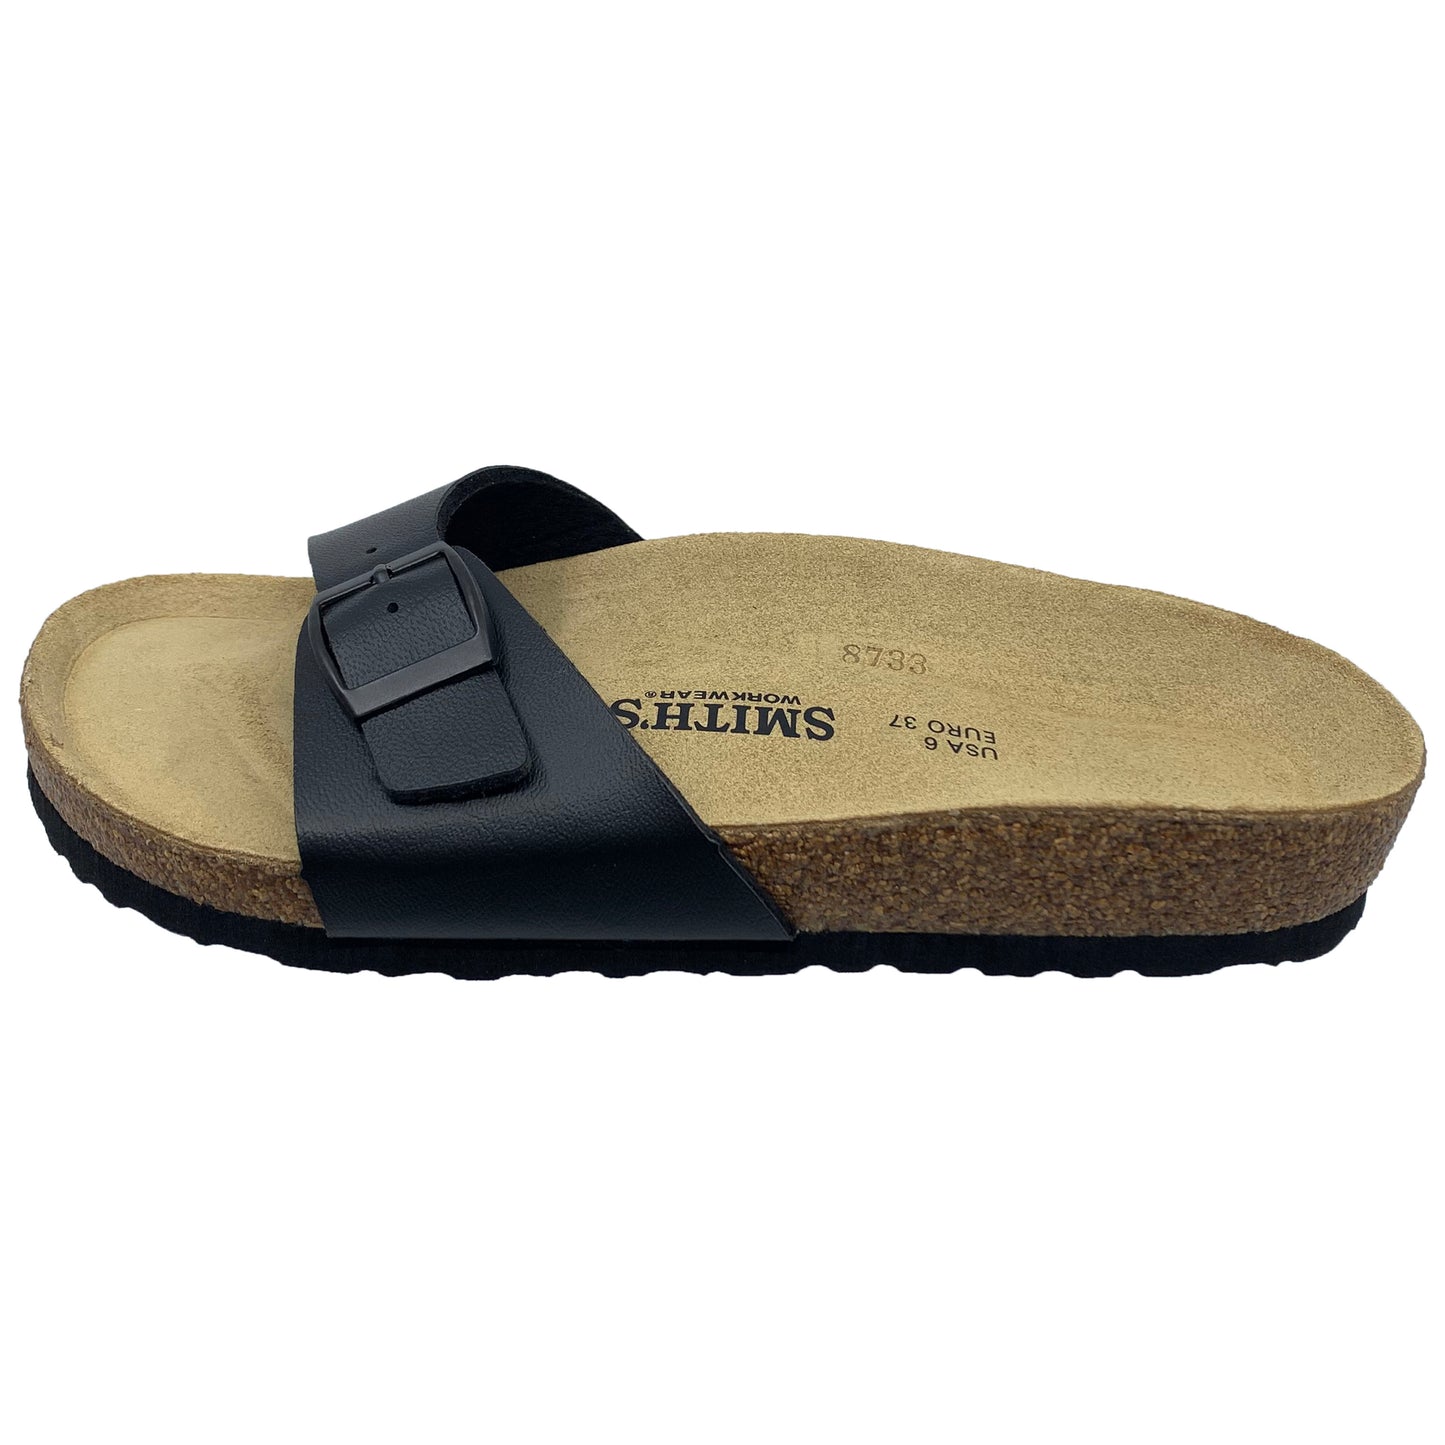 Smith's Work Wear Single Strap Soft Footbed Sandals Womens Style : Wsm30032